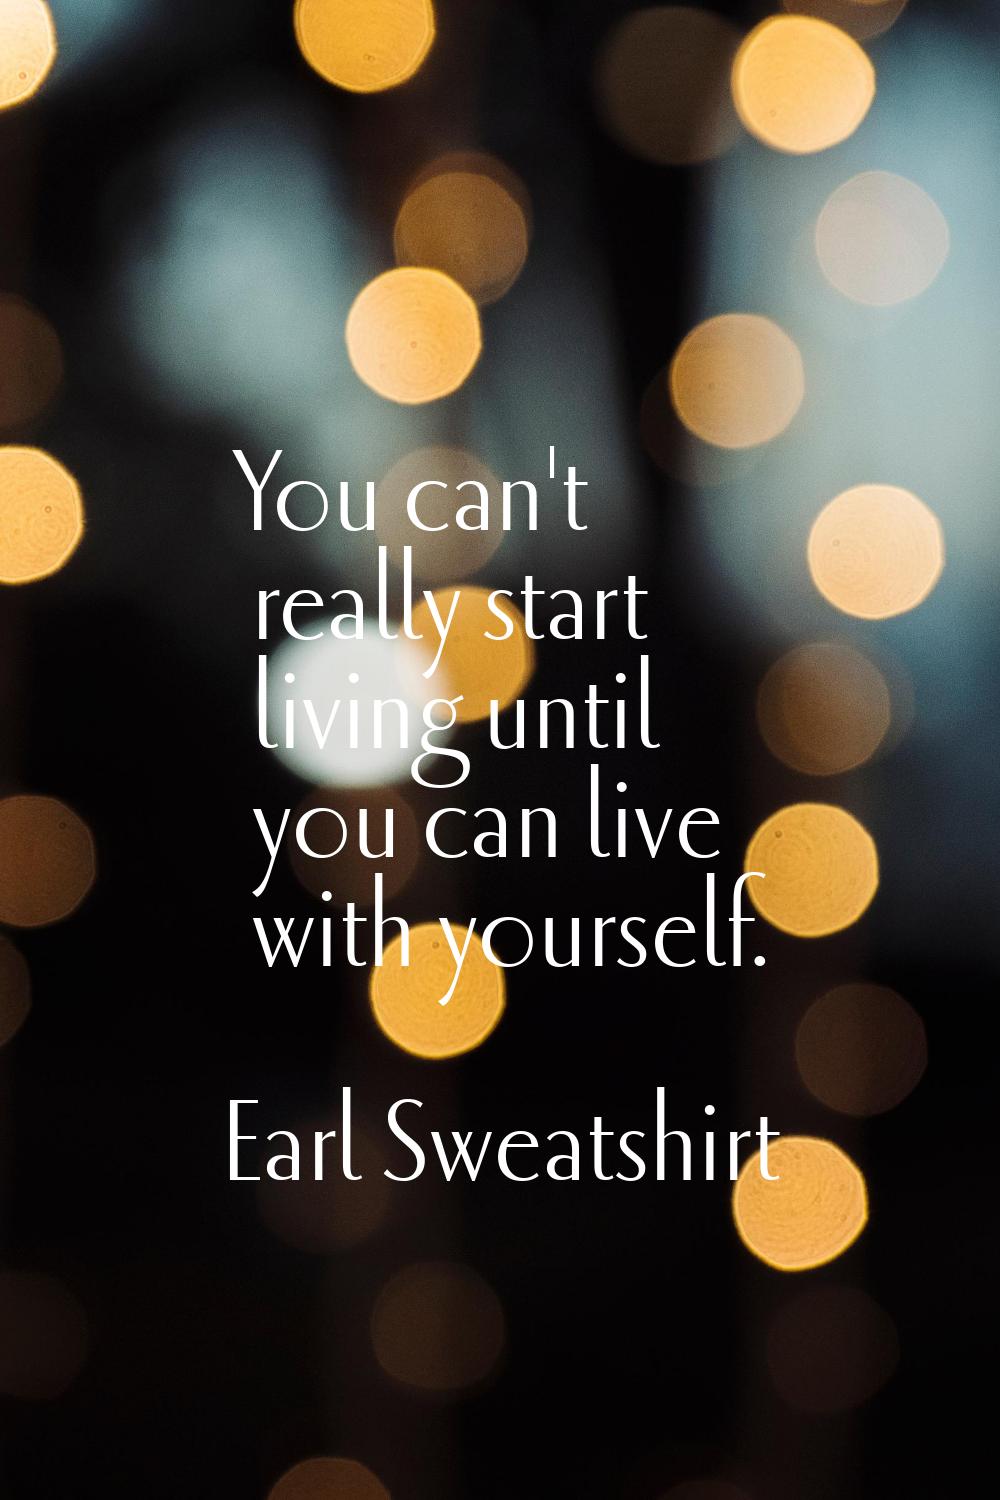 You can't really start living until you can live with yourself.